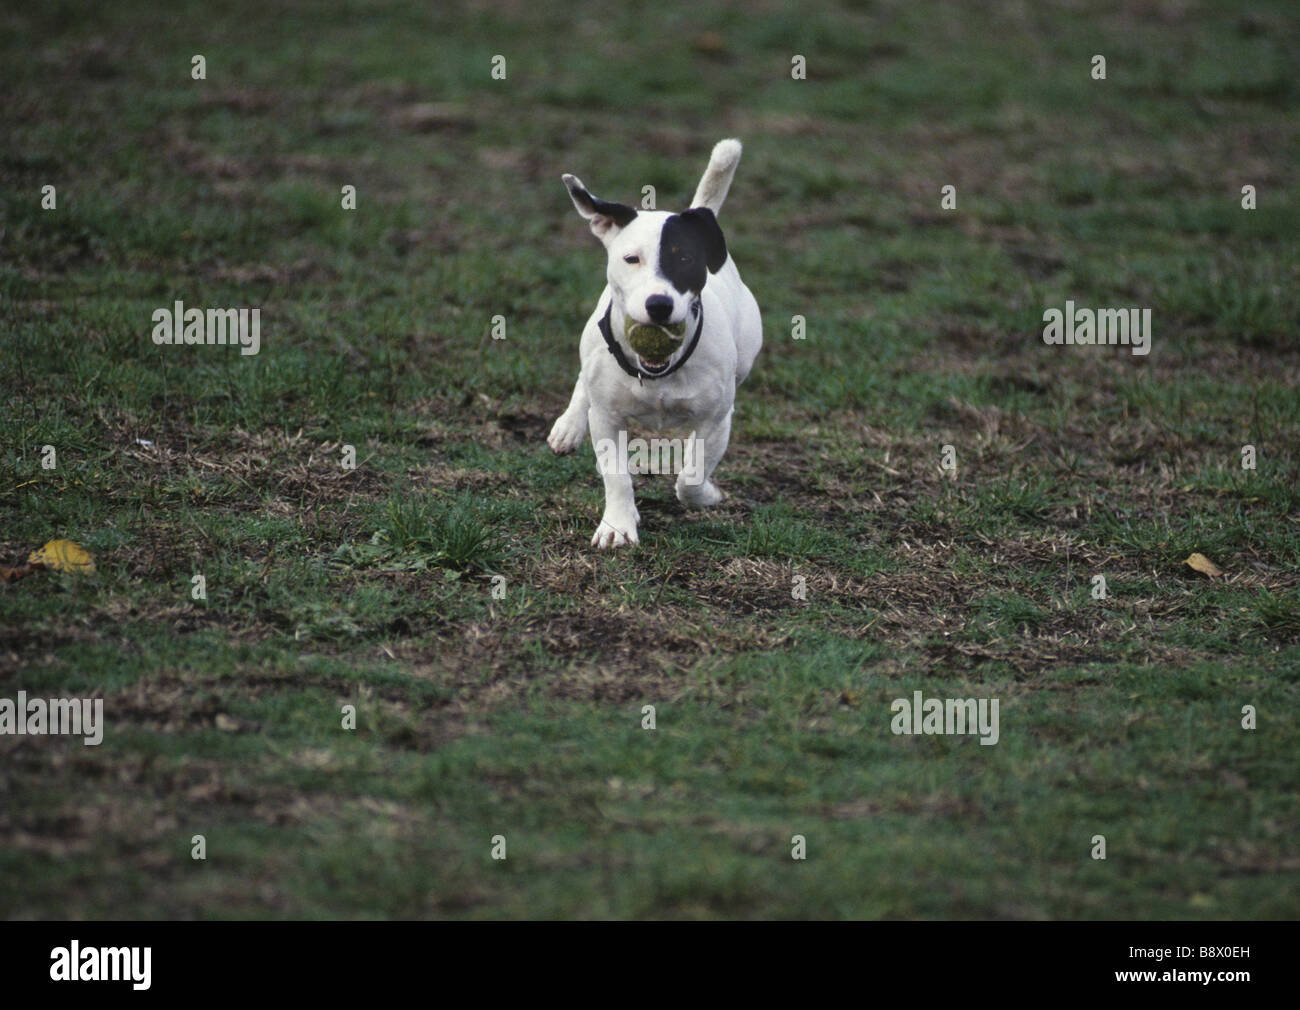 Jack Russell Terrier carrying a ball Stock Photo